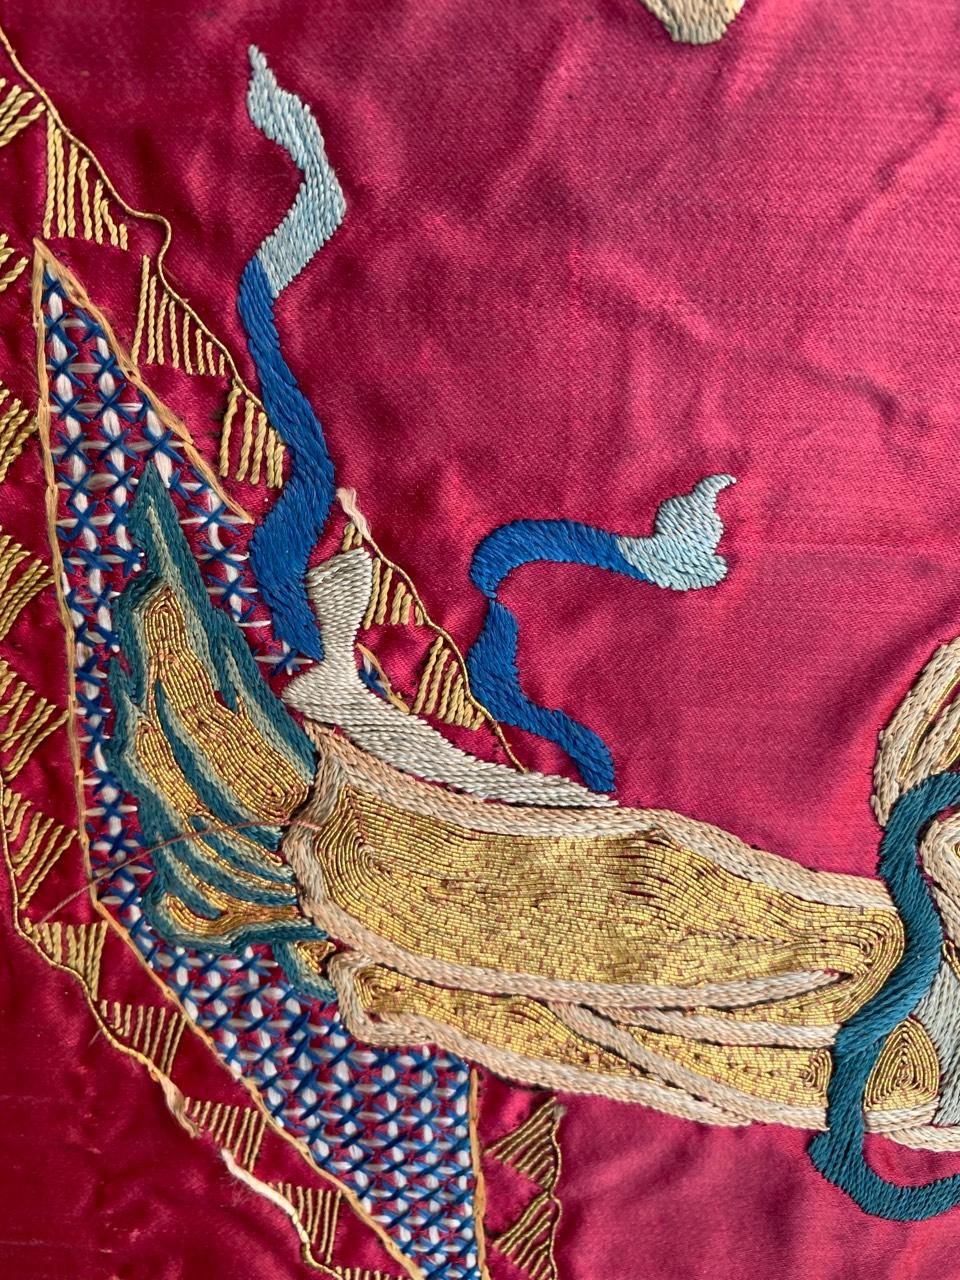 Bobyrug's Antique Chinese Silk and Metal Embroidery (broderie chinoise ancienne sur soie et métal) en vente 1